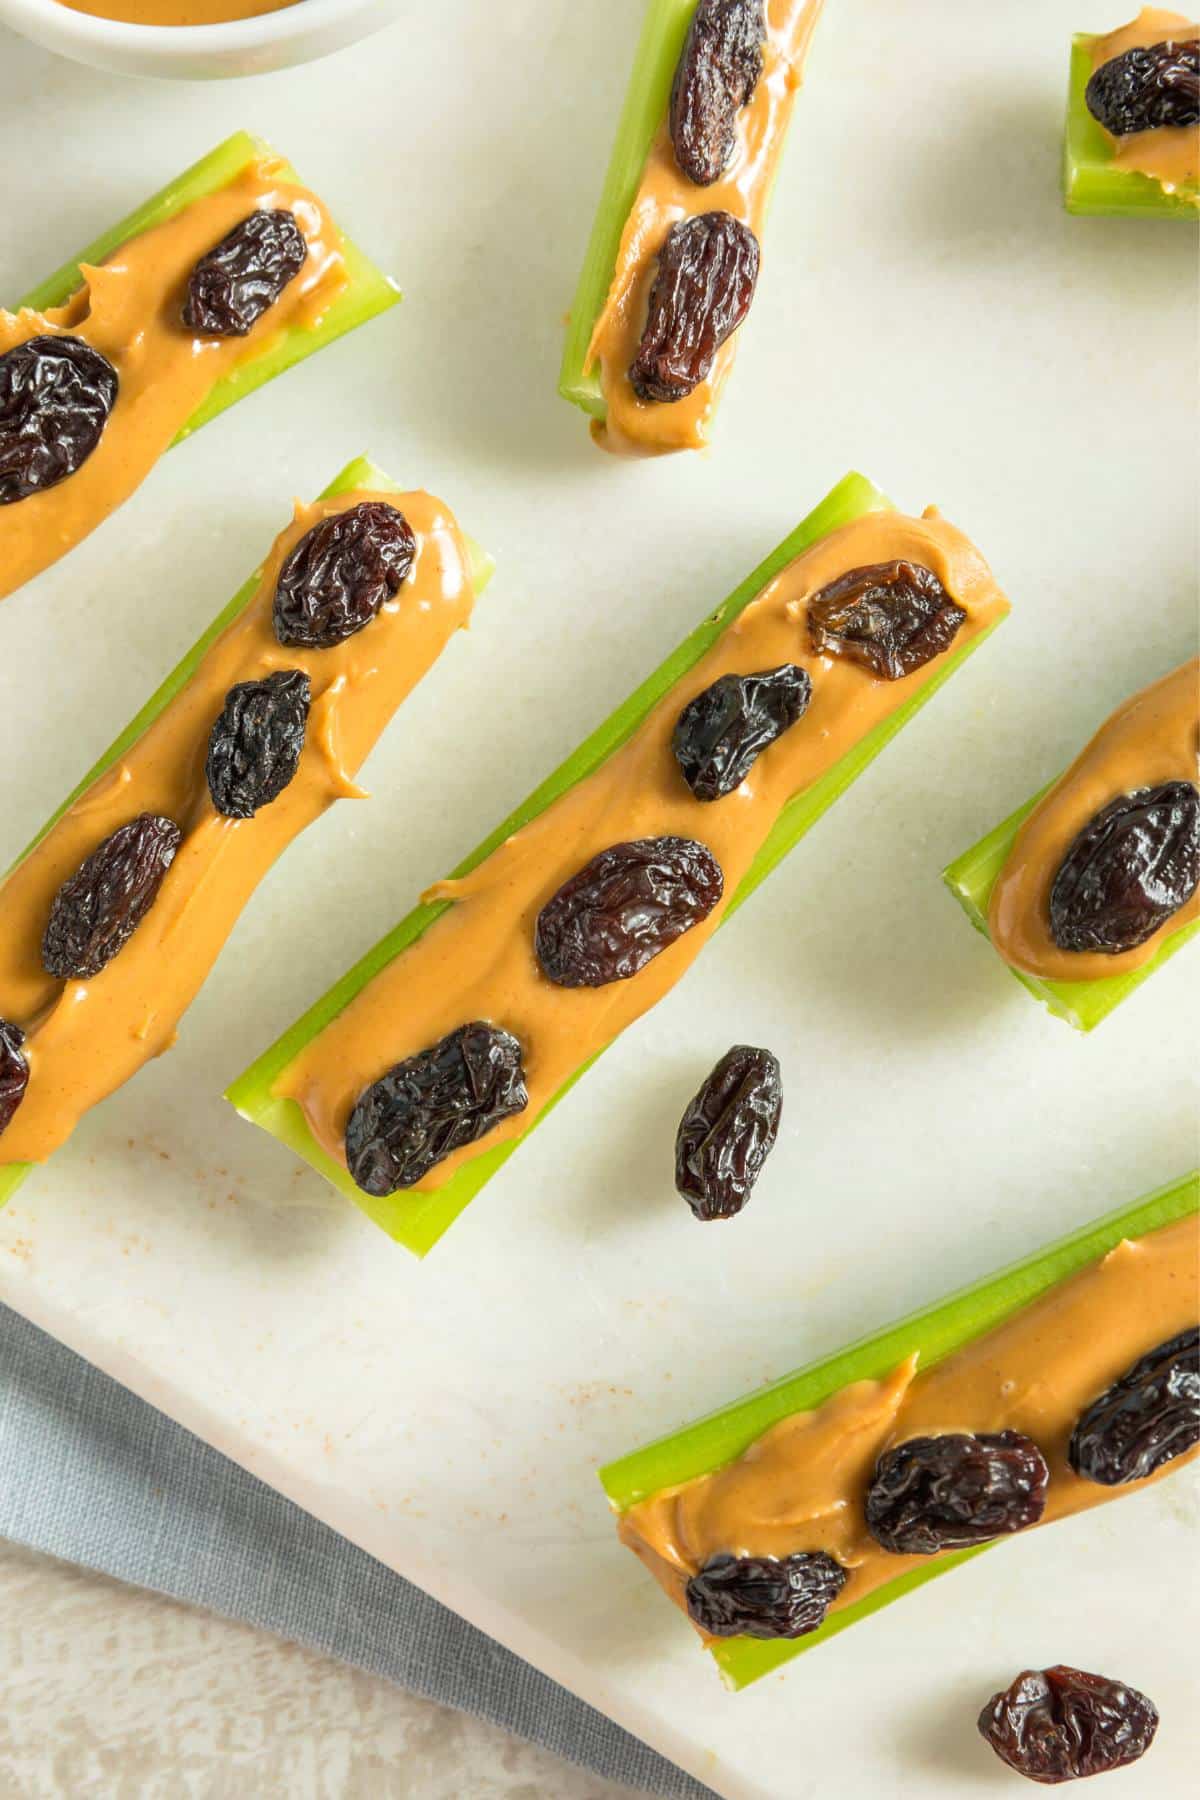 Celery with peanut butter and raisins on top.